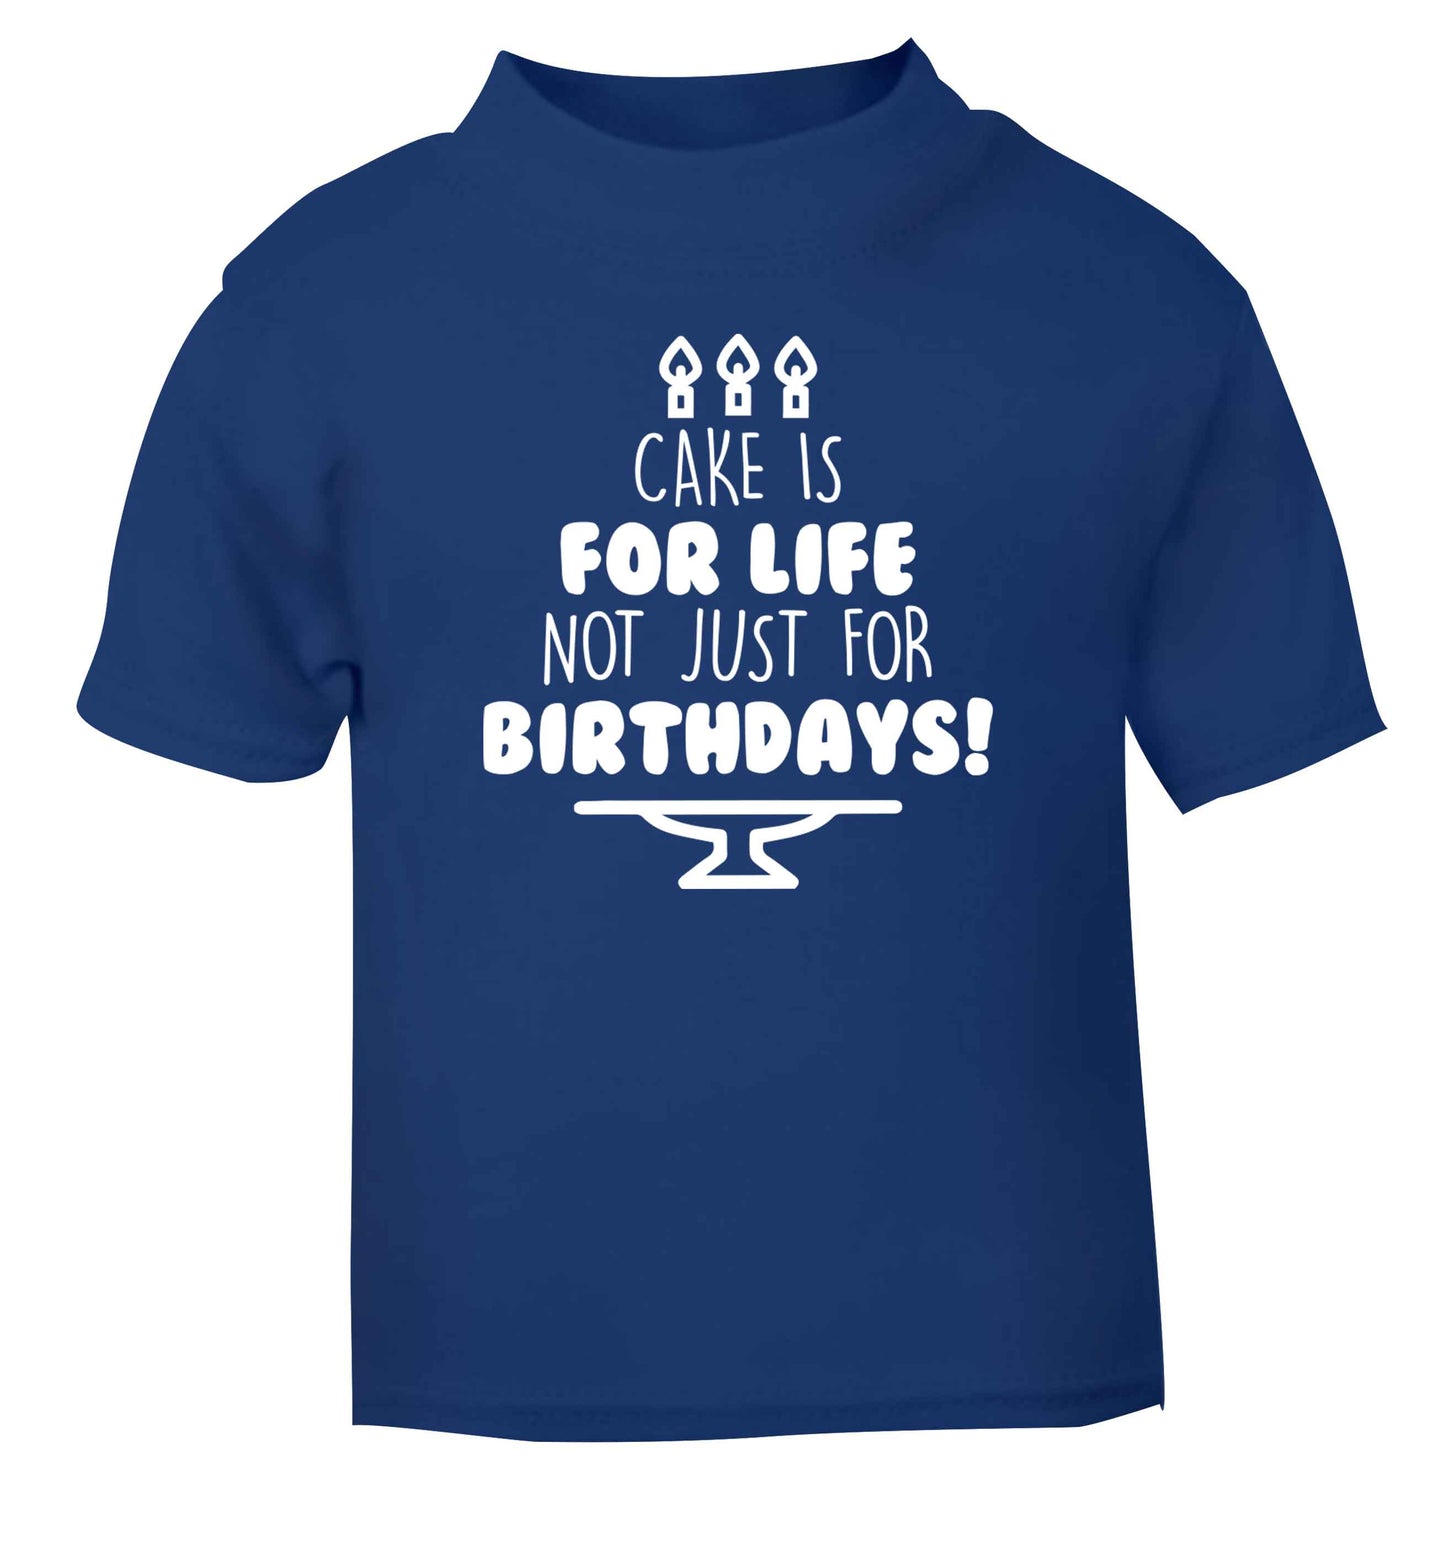 Cake is for life not just for birthdays blue Baby Toddler Tshirt 2 Years